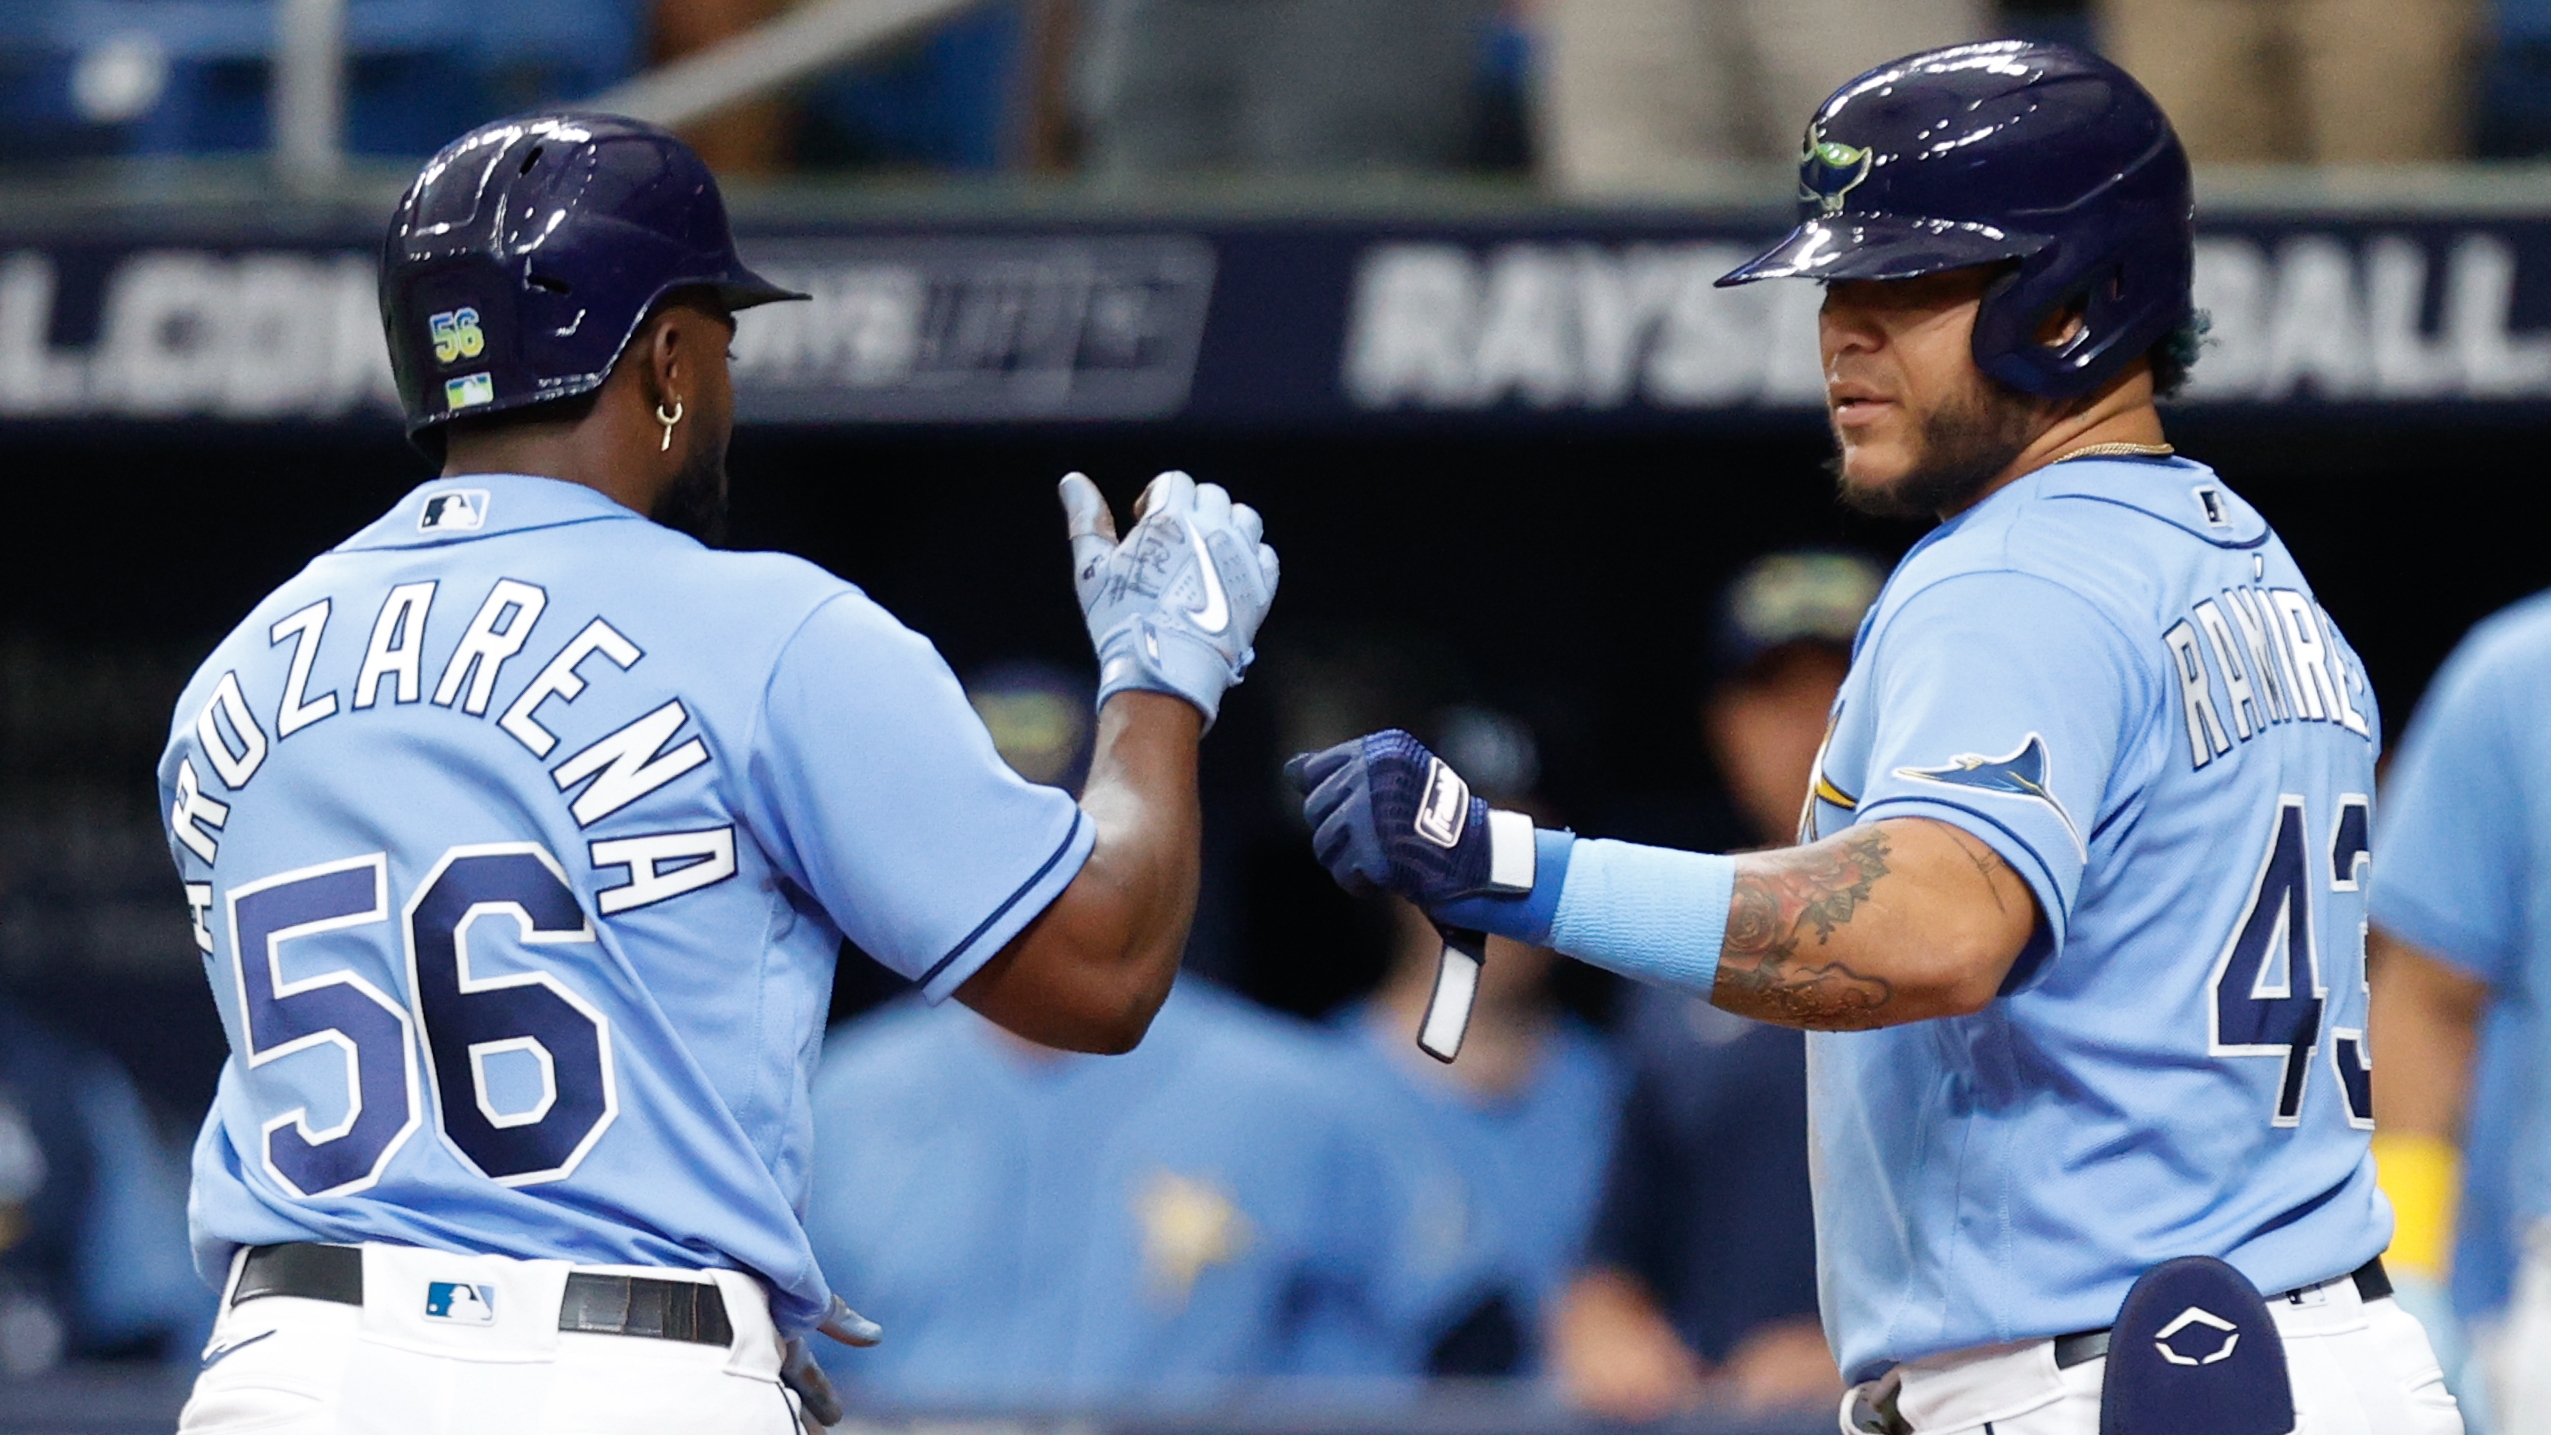 Tampa Bay Rays 'Feel Better' Going Into All-Star Break On Winning Note